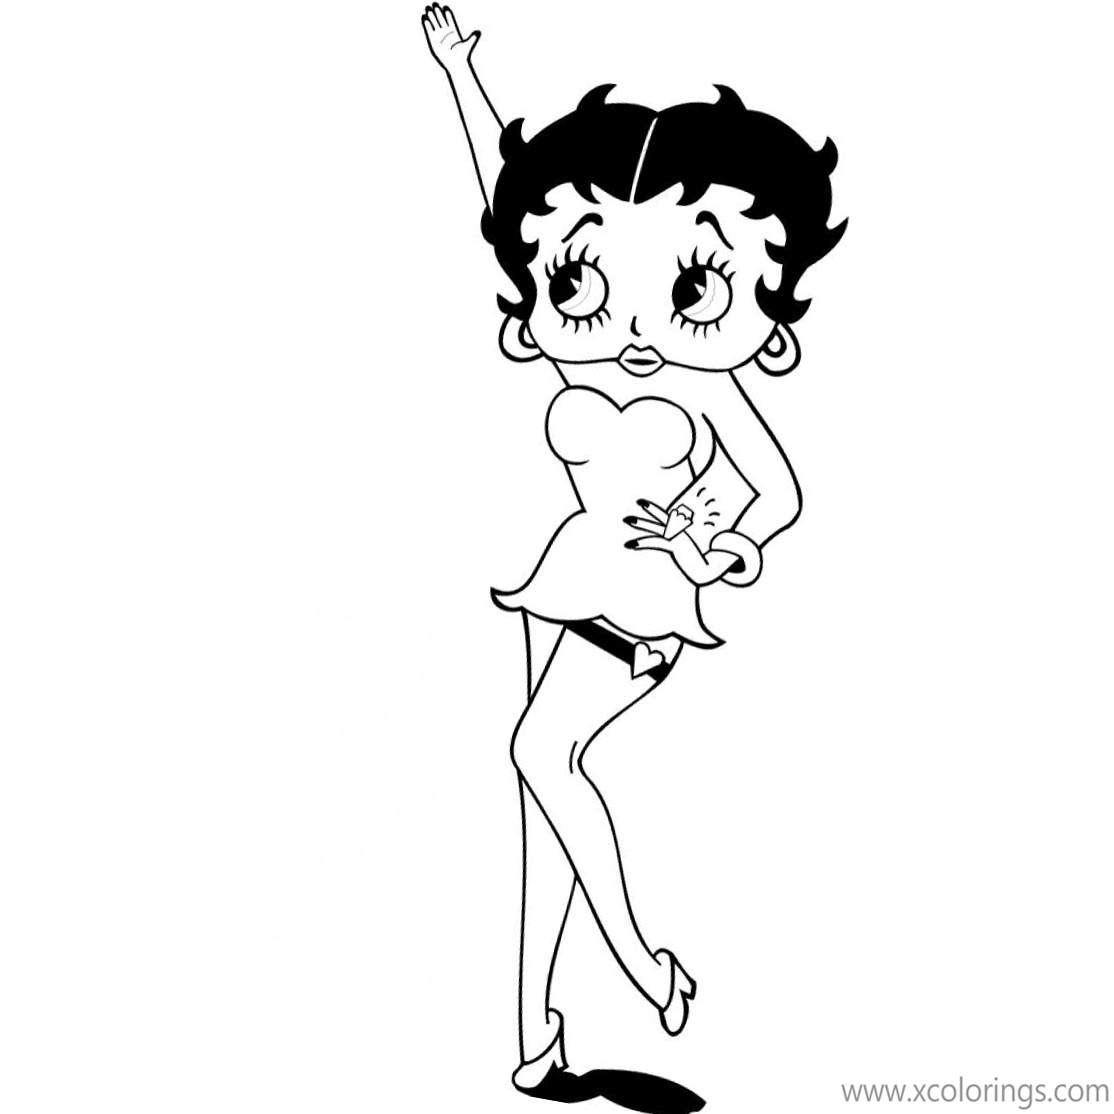 Free Betty Boop Coloring Pages Dancing printable